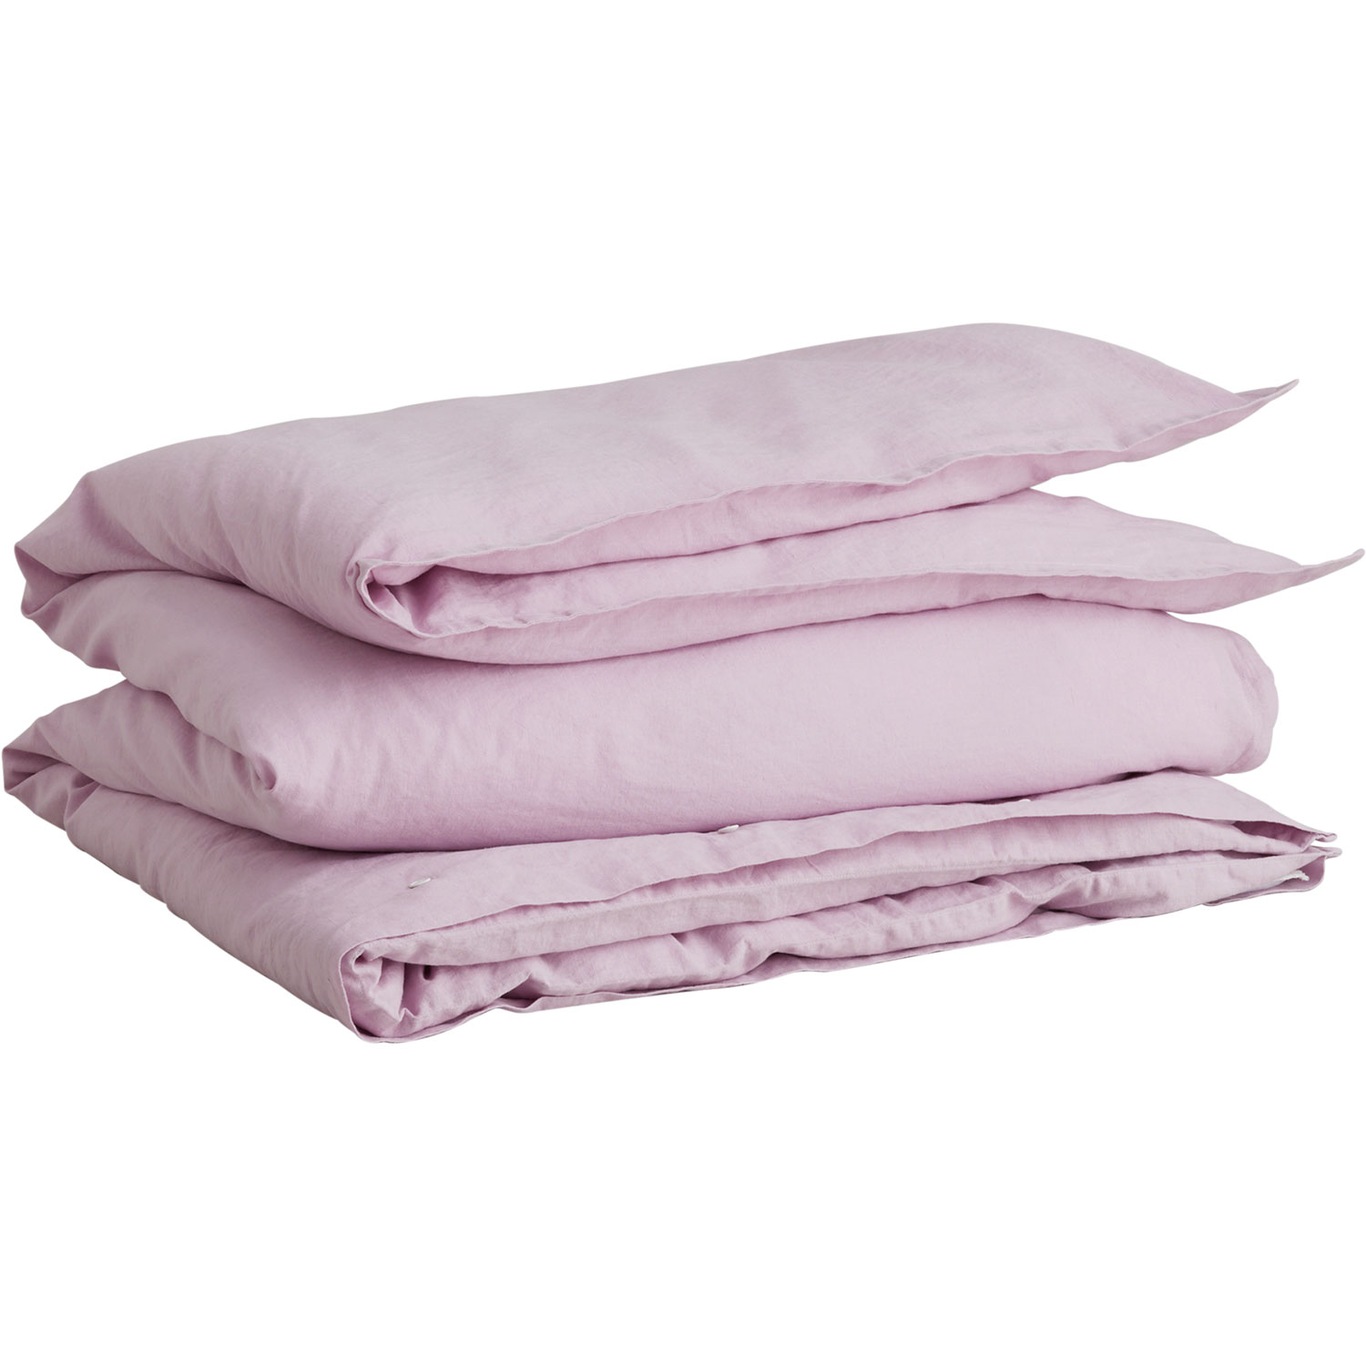 Cotton Linen Pussilakana 220x220 cm, Soothing Lilac